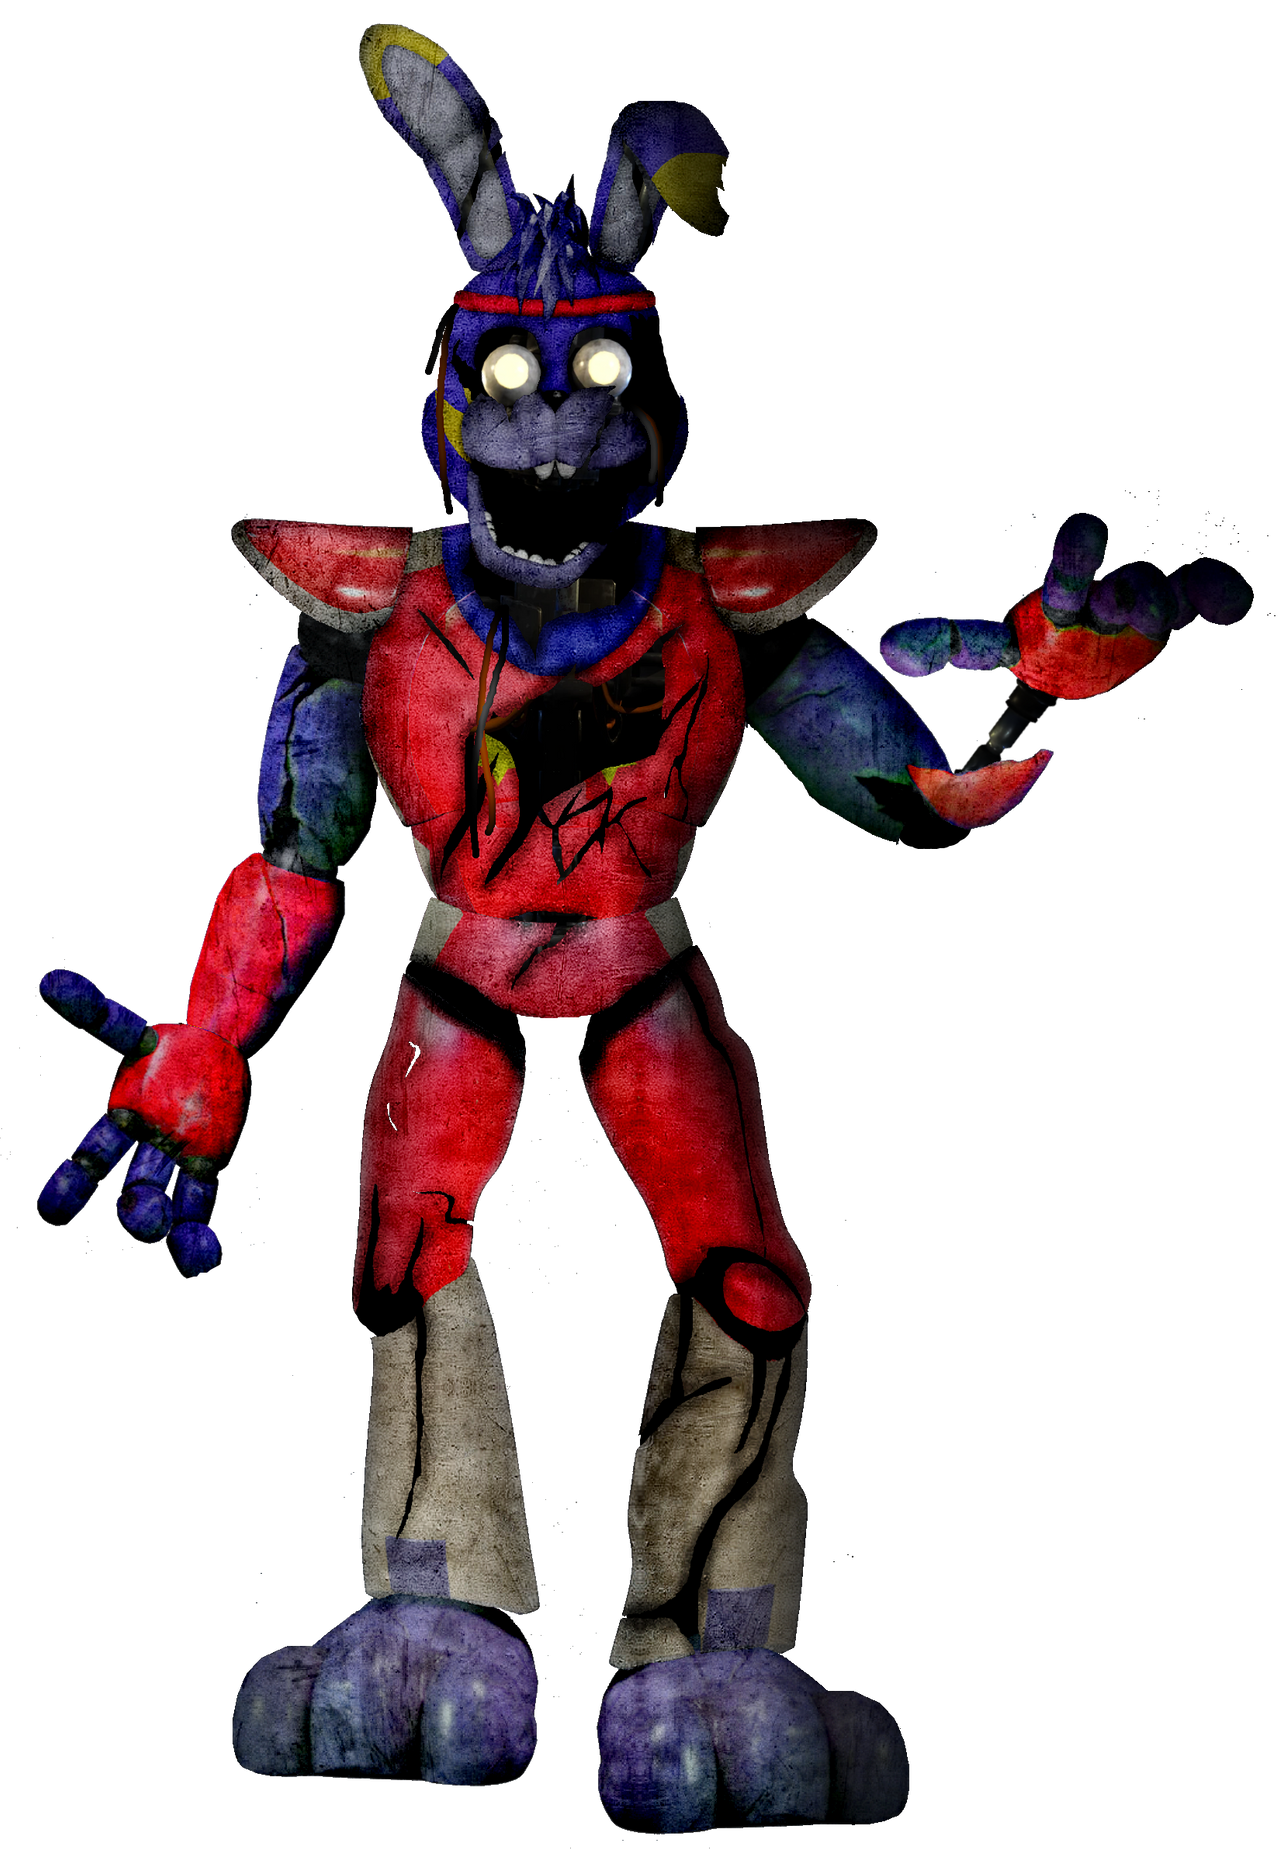 I'm now currently trying to fix glamrock Bonnie : r/fivenightsatfreddys